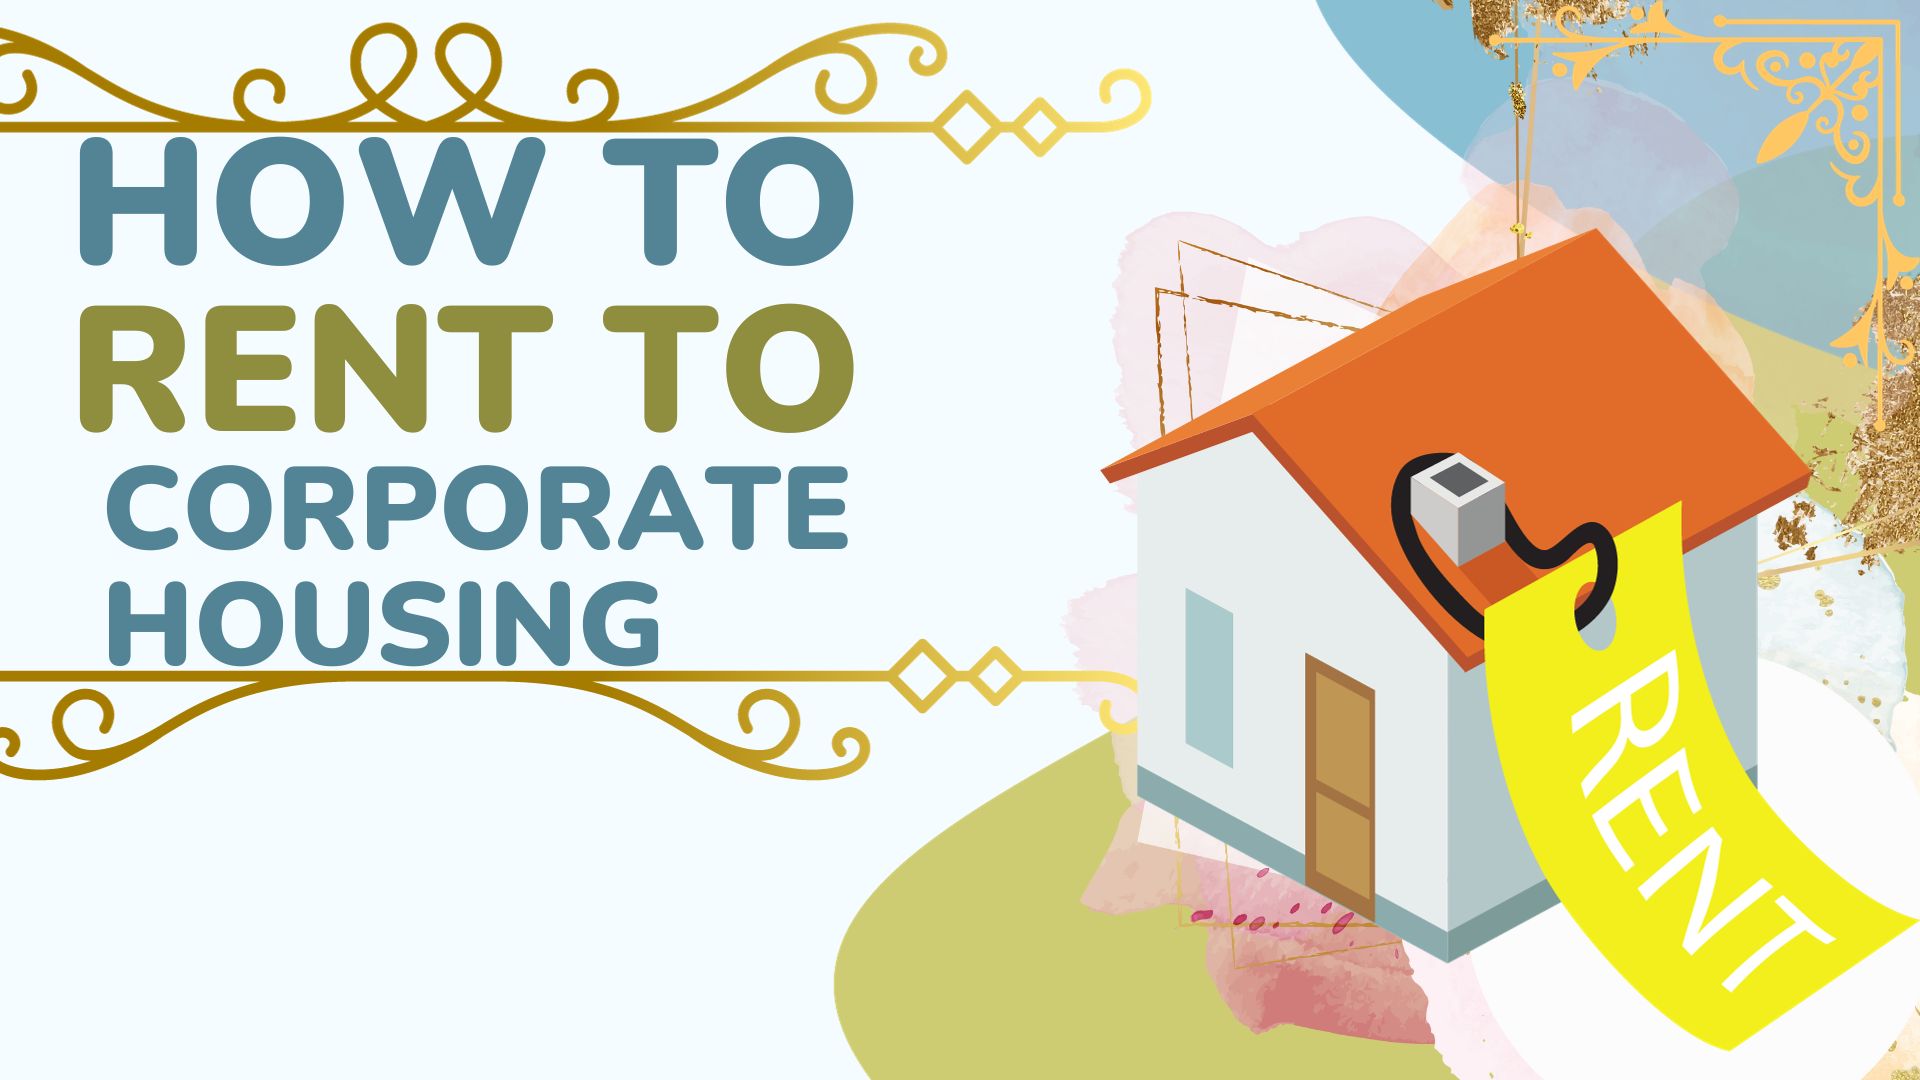 How to Rent to Corporate Housing